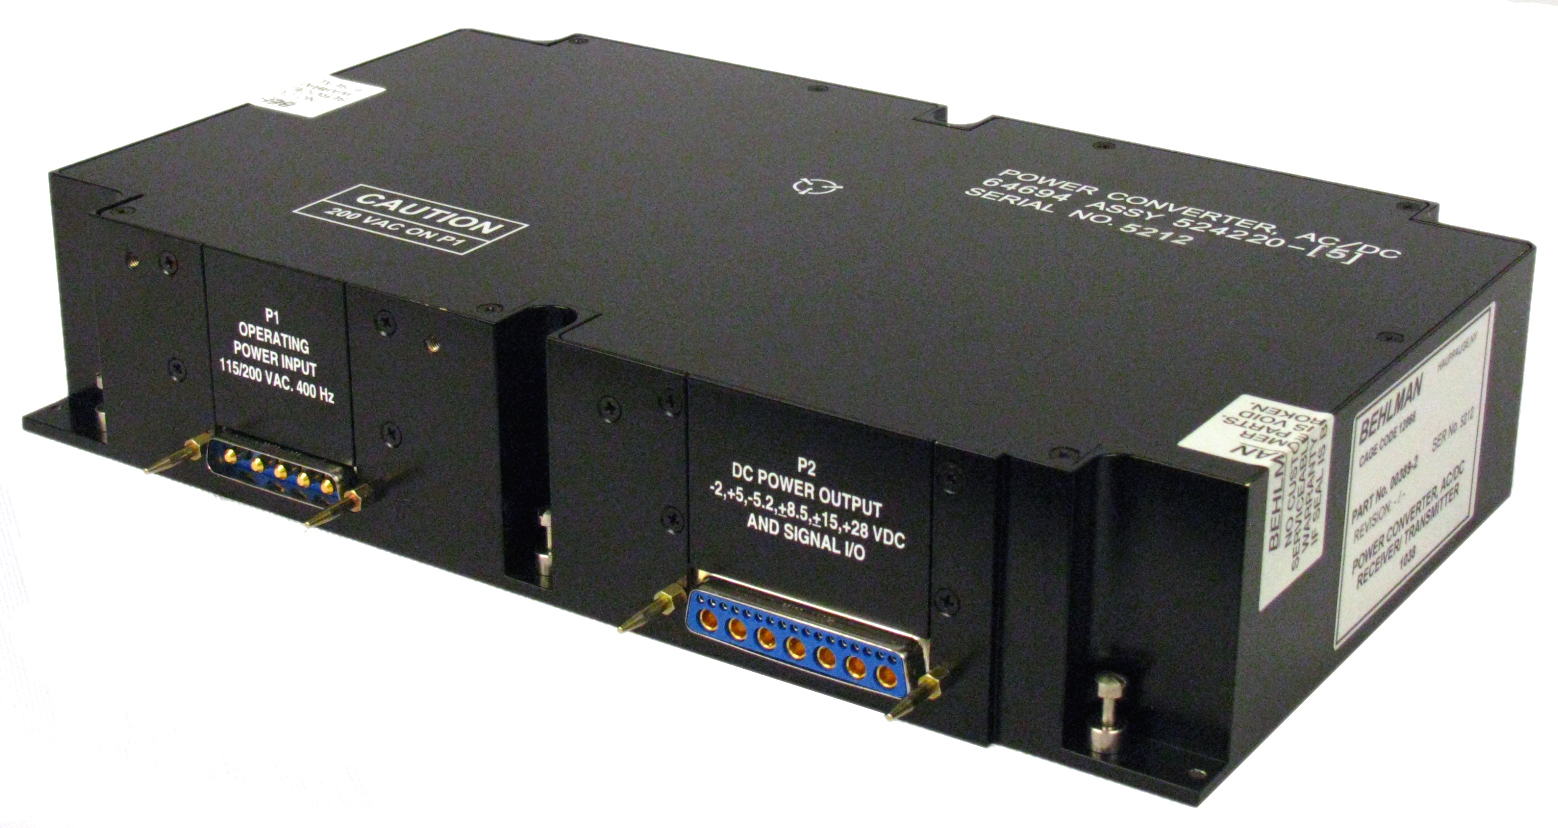 The Behlman Model 00389 COTS Power Supply is designed and manufactured to withstand the rigors of airborne, shipboard and mobile use, while meeting a wide range of MIL-STANDARDS.